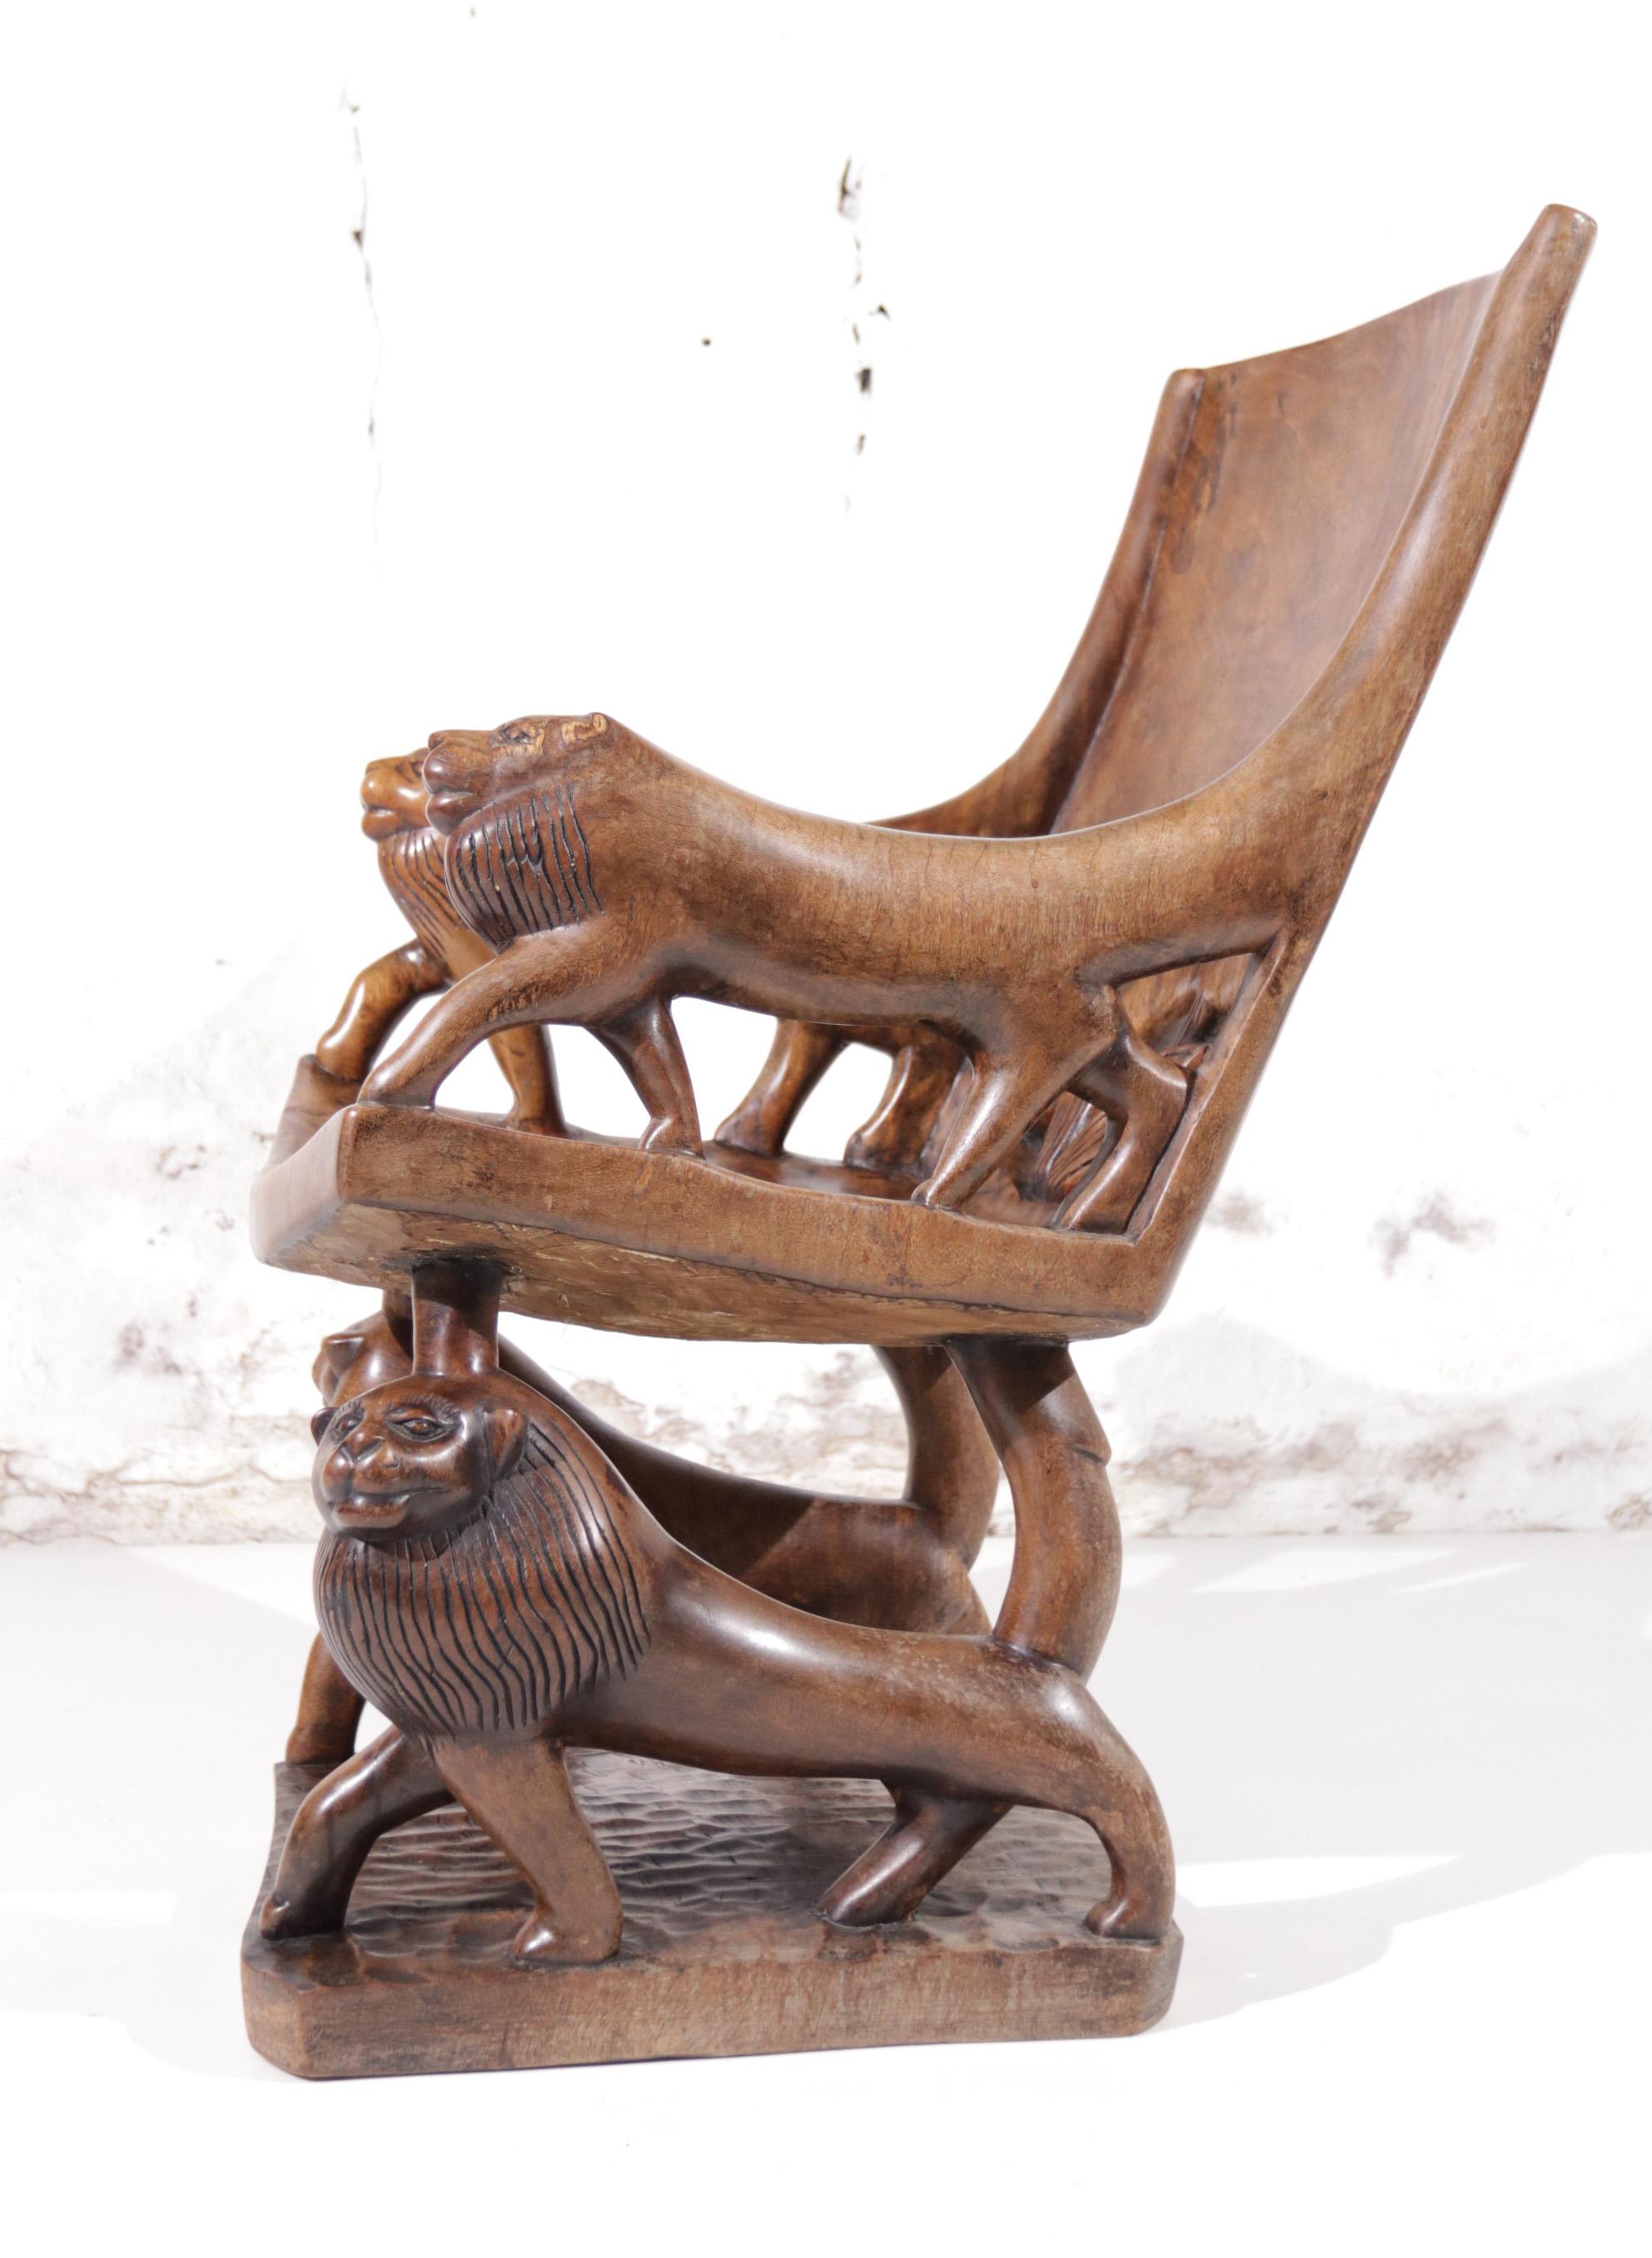 Teak Exquisite African Sculptural Lion Throne 1 Piece of Solid Hand Carved Wood